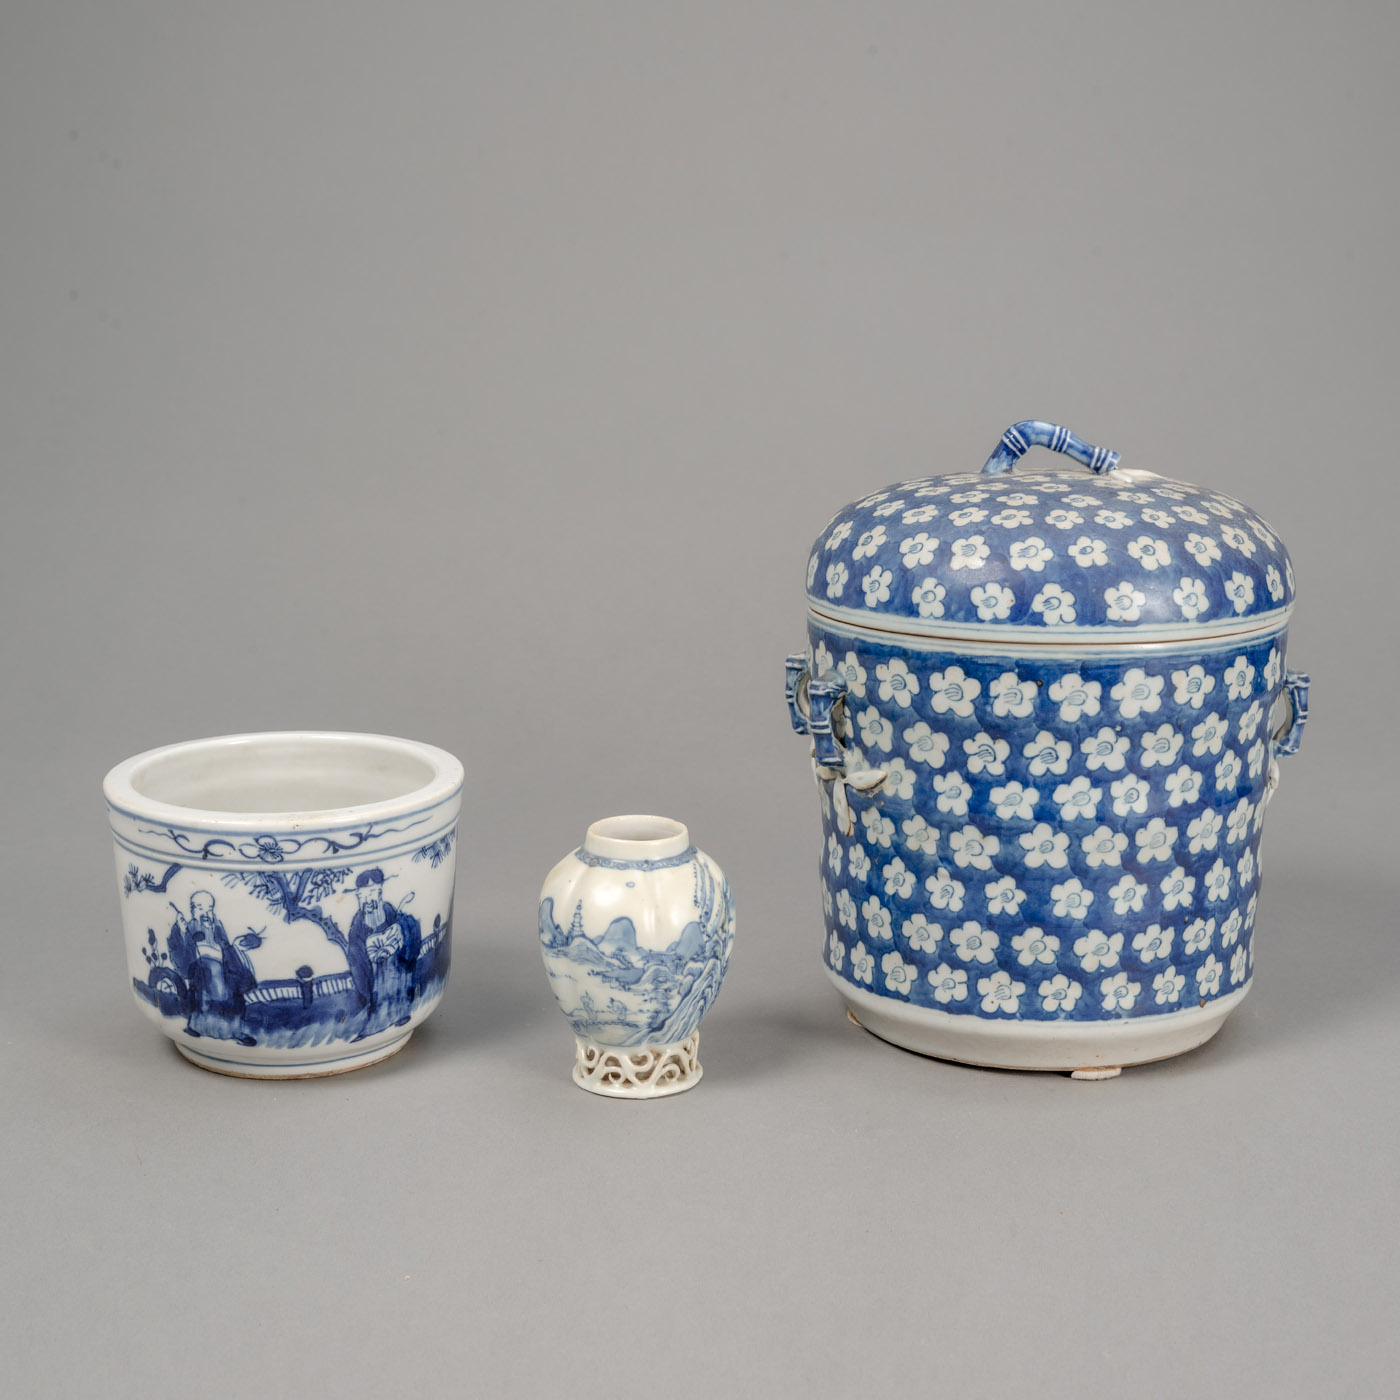 <b>A BLUE AND WHITE PRUNUS AND BAMBOO PORCELAIN BOX WITH COVER, A CENSER, AND A SMALL VASE</b>